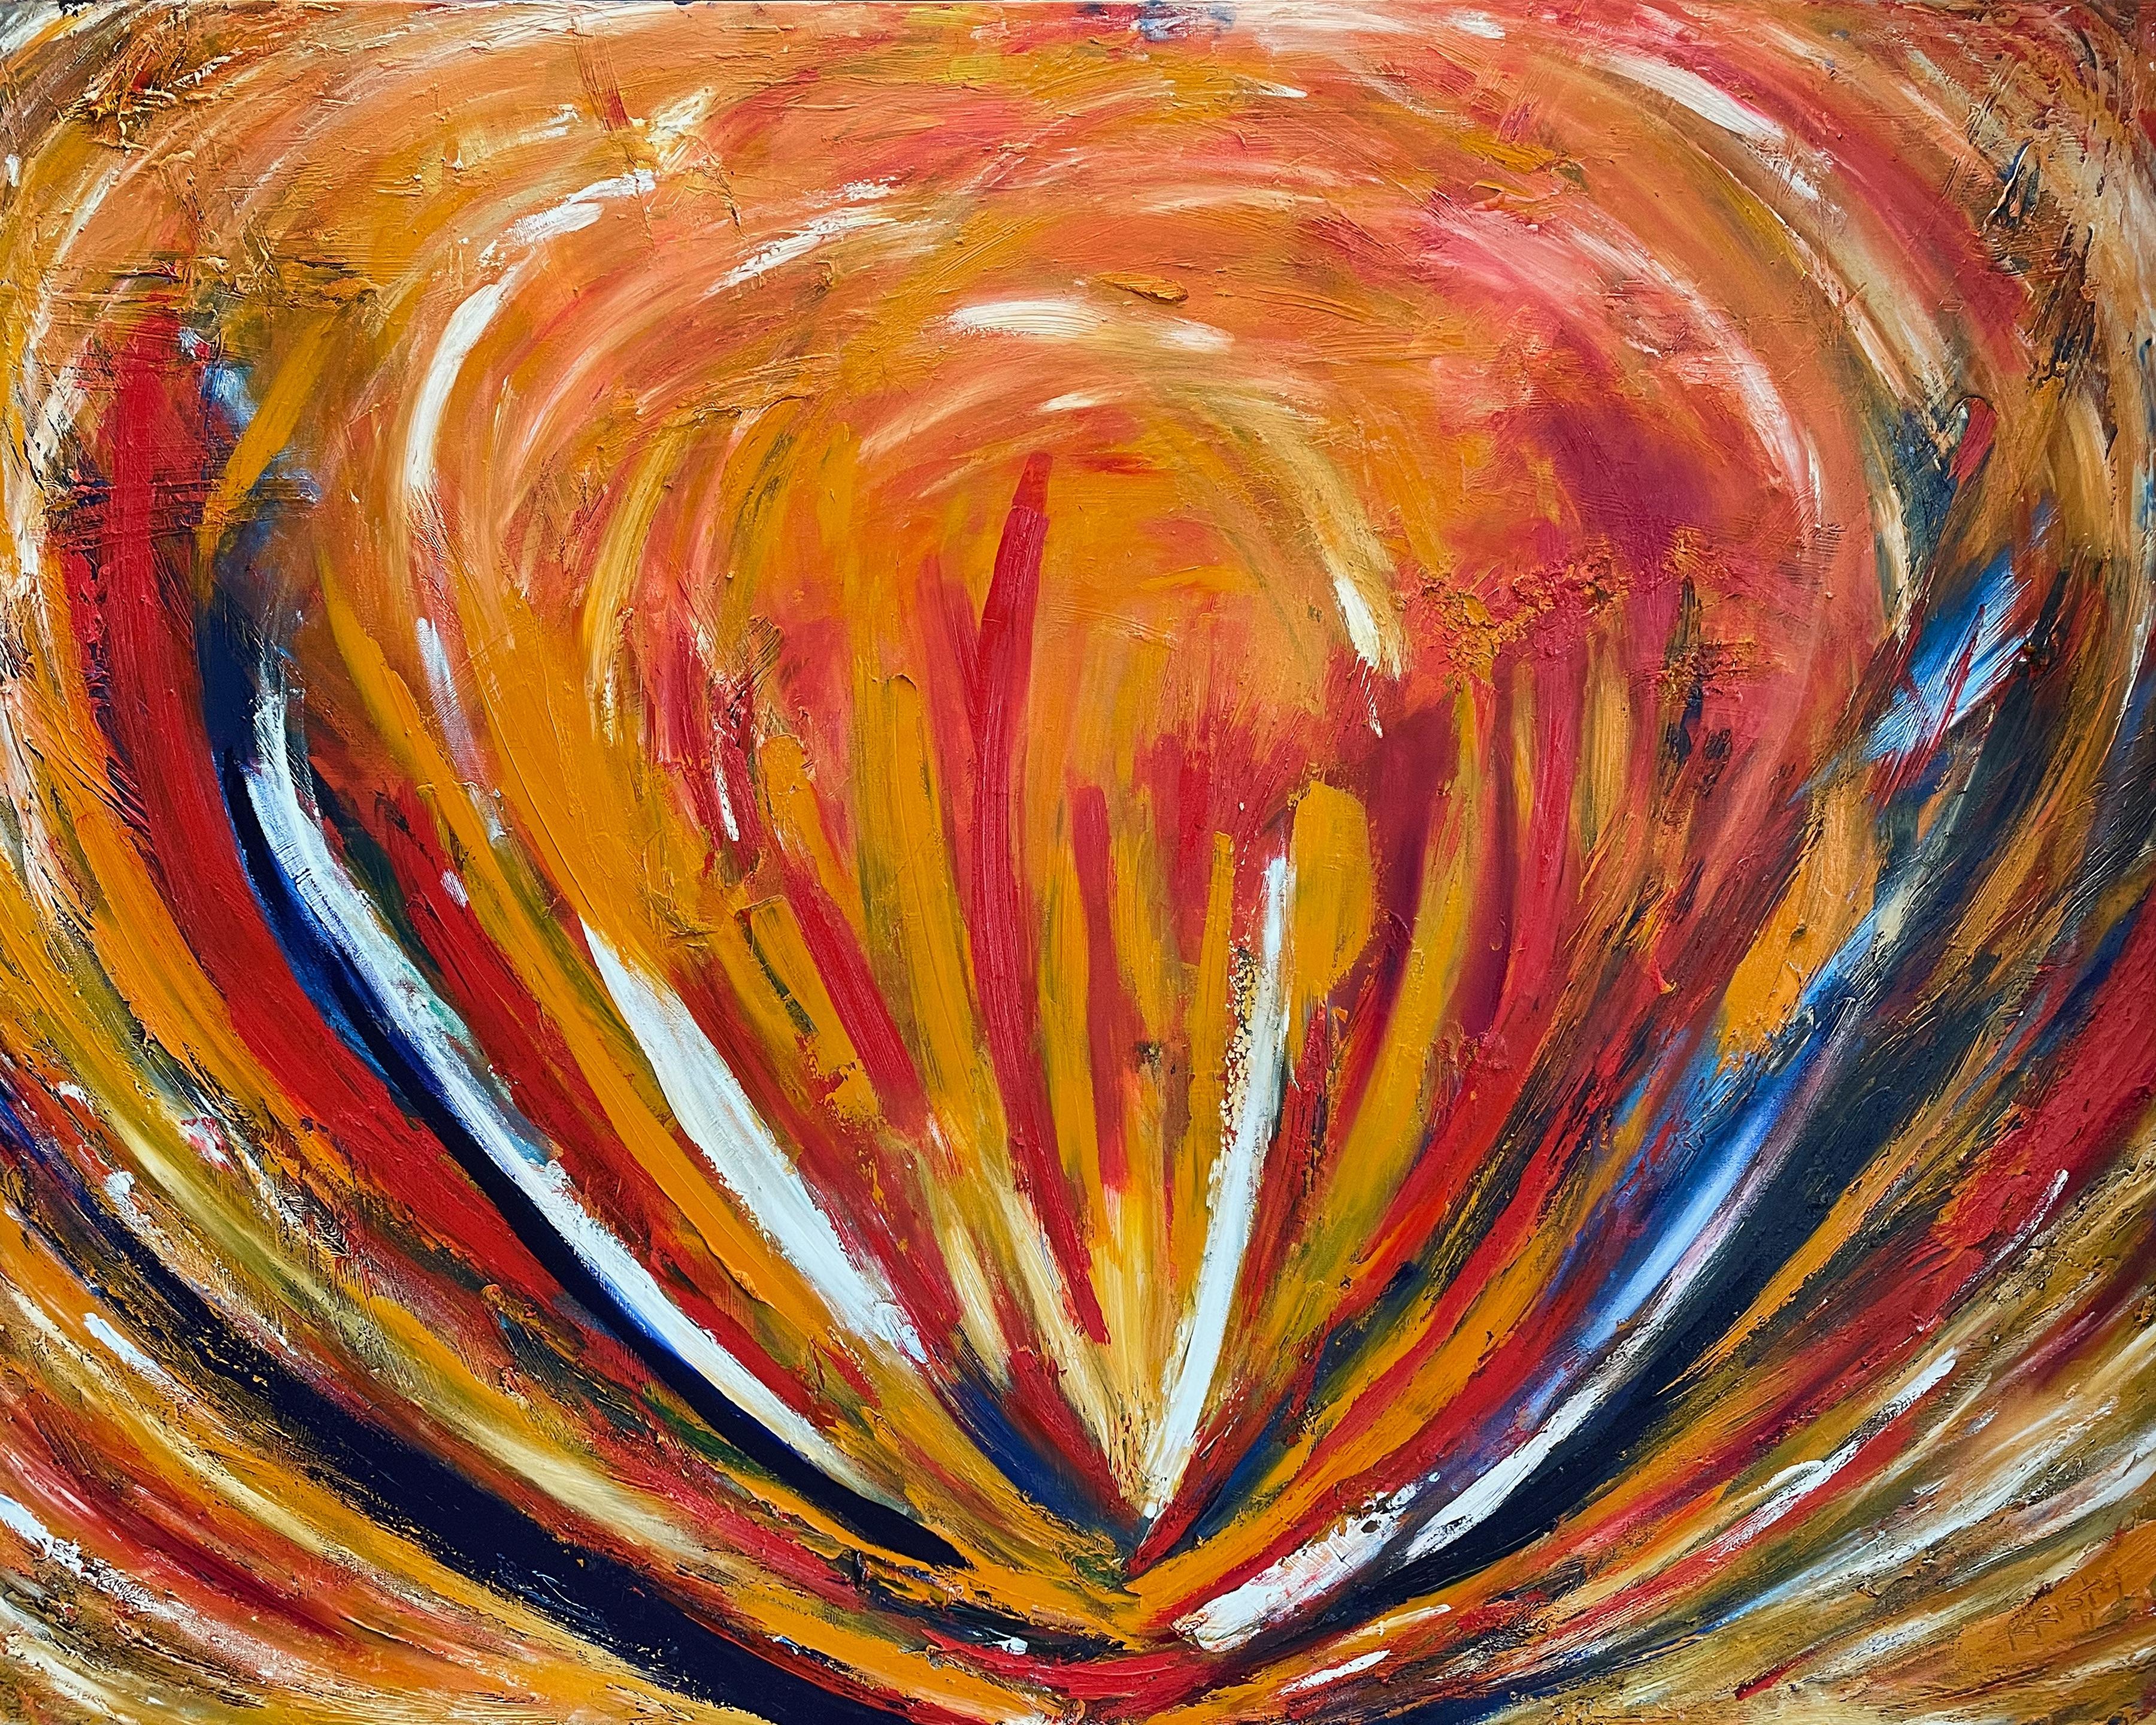 "Lotus" is a striking oil painting by Kristy Chettle, sized at 48" x 60". It bursts with bold colors and movement, true to the abstract expressionist style it represents. Warm reds, oranges, and yellows swirl around the canvas, drawing the eye